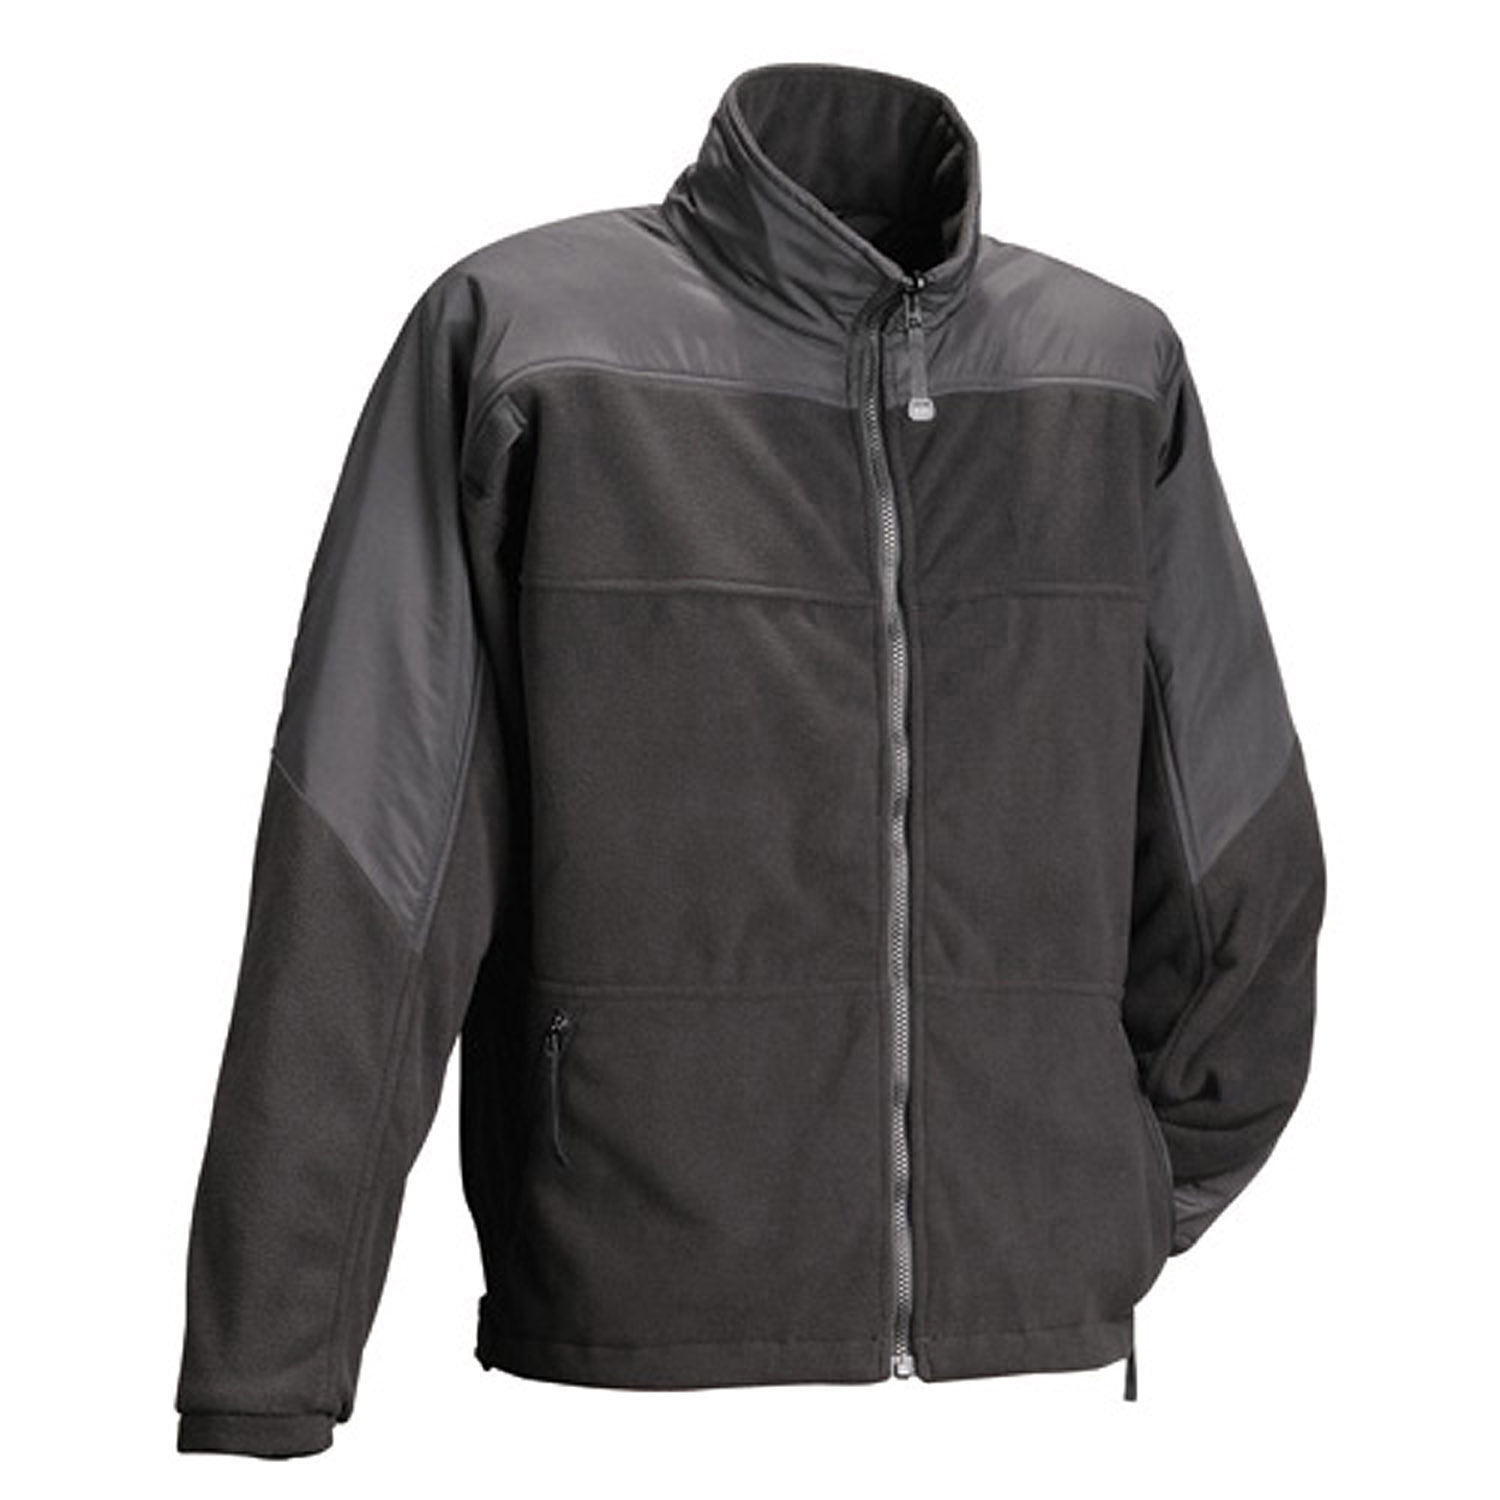 5.11 Tactical 3-in-1 ANSI Class 3 Reversible Parka